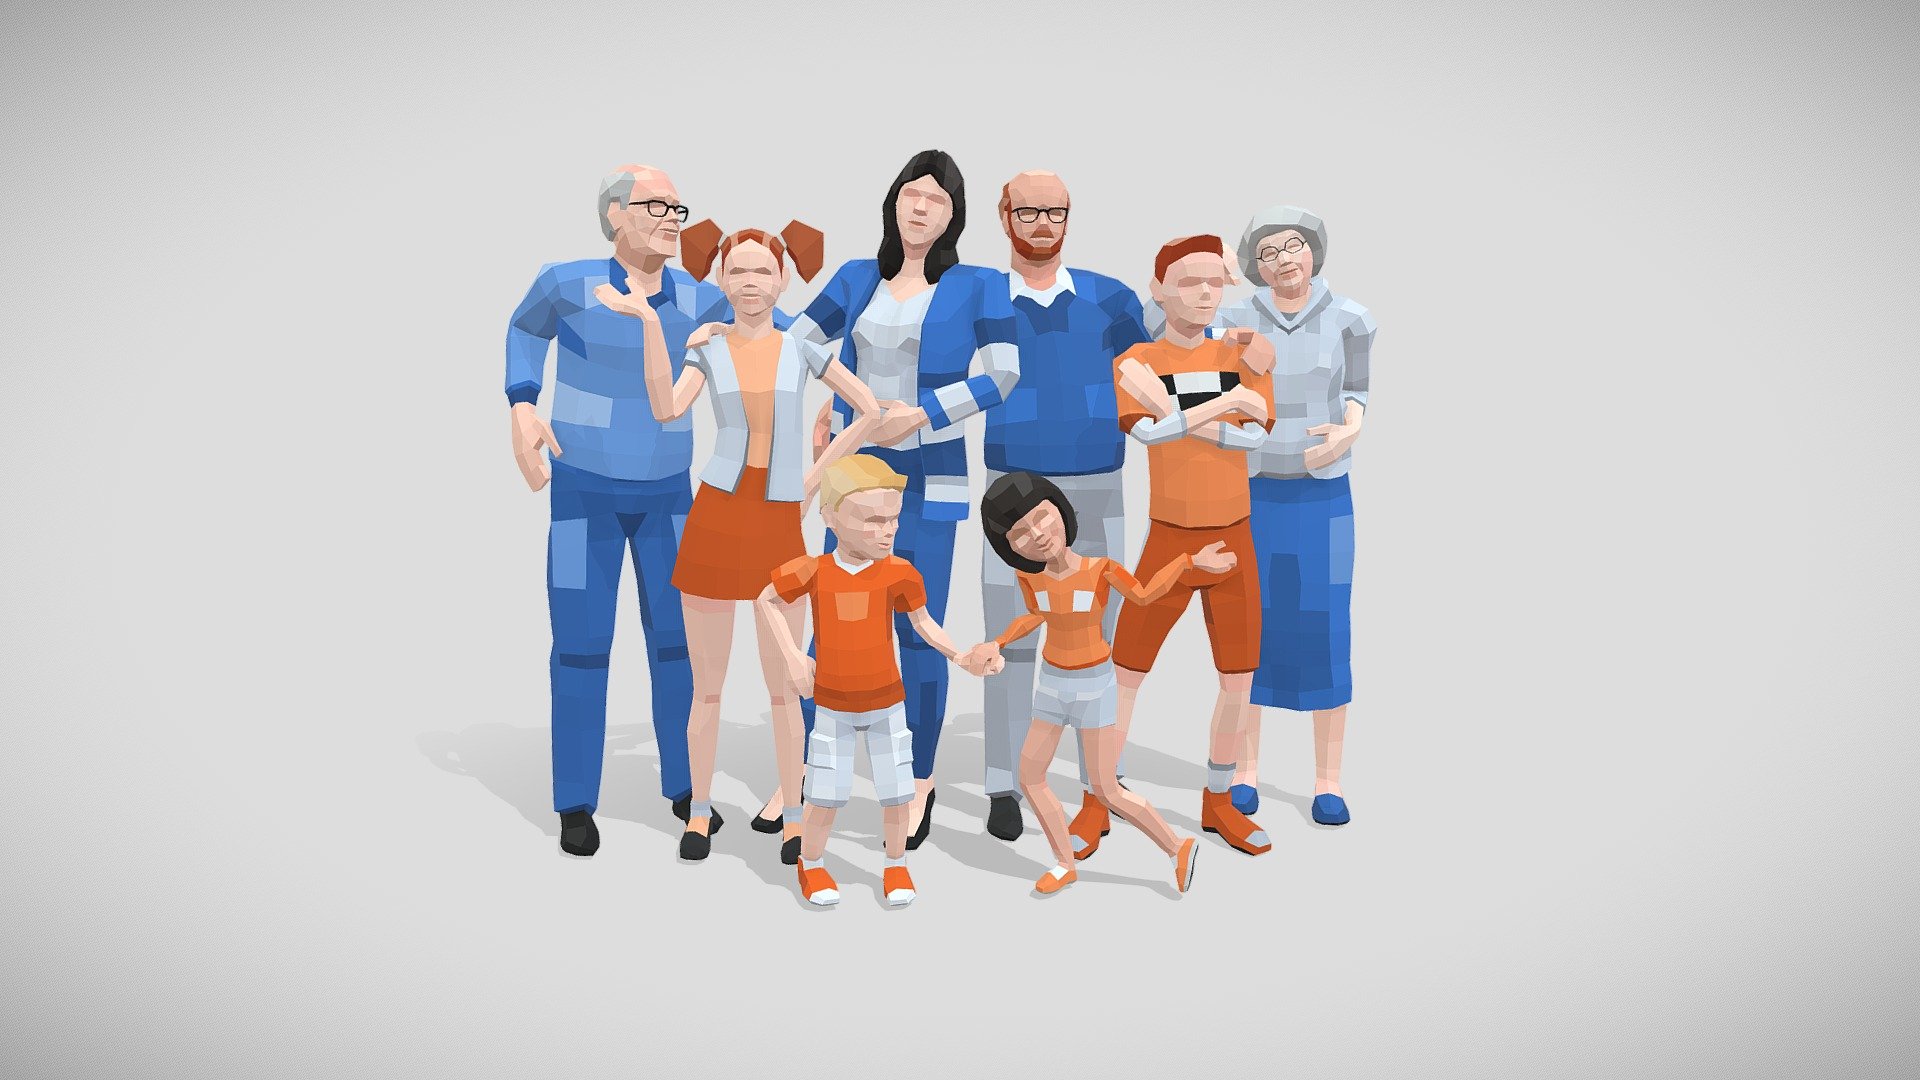 LowPoly Style family group of 8. Optimized for AR/VR and mobile and web apps.  Created with 3ds Max 2022.
Download Additional Files all individual rigs as .MAX, .FBX.

Texture customization easier than ever:


Tested with Unity for compatibility with Humanoid System.
Rigged with 3ds  Max Biped and Skin modifier.
Any set of models can share a unique texture, costumize and apply as you wish.

Source PSD texture included, layers organized in folders 3d model